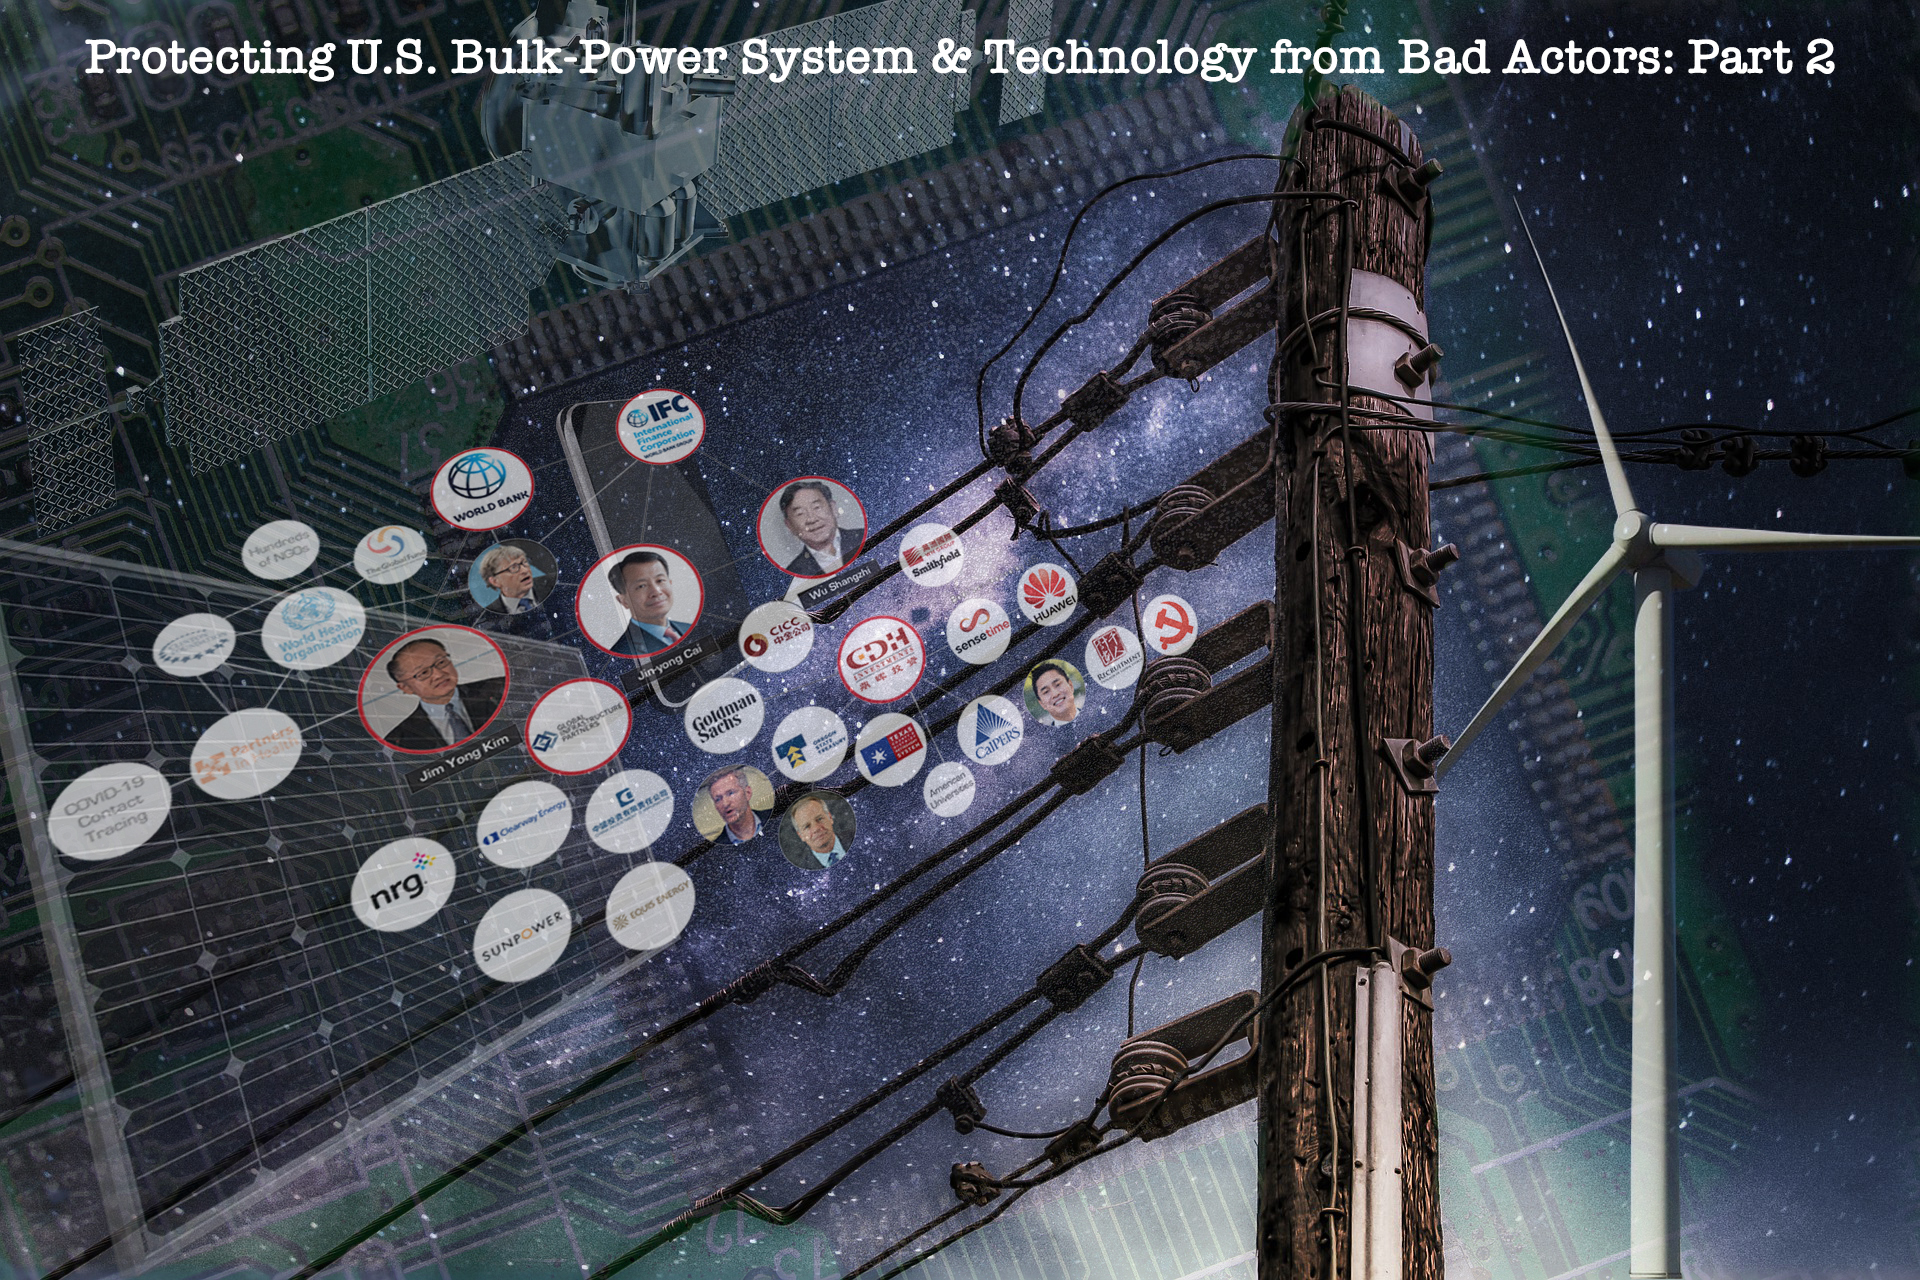  Protecting U.S. Bulk-Power System & Technology from Bad Actors: Part 2